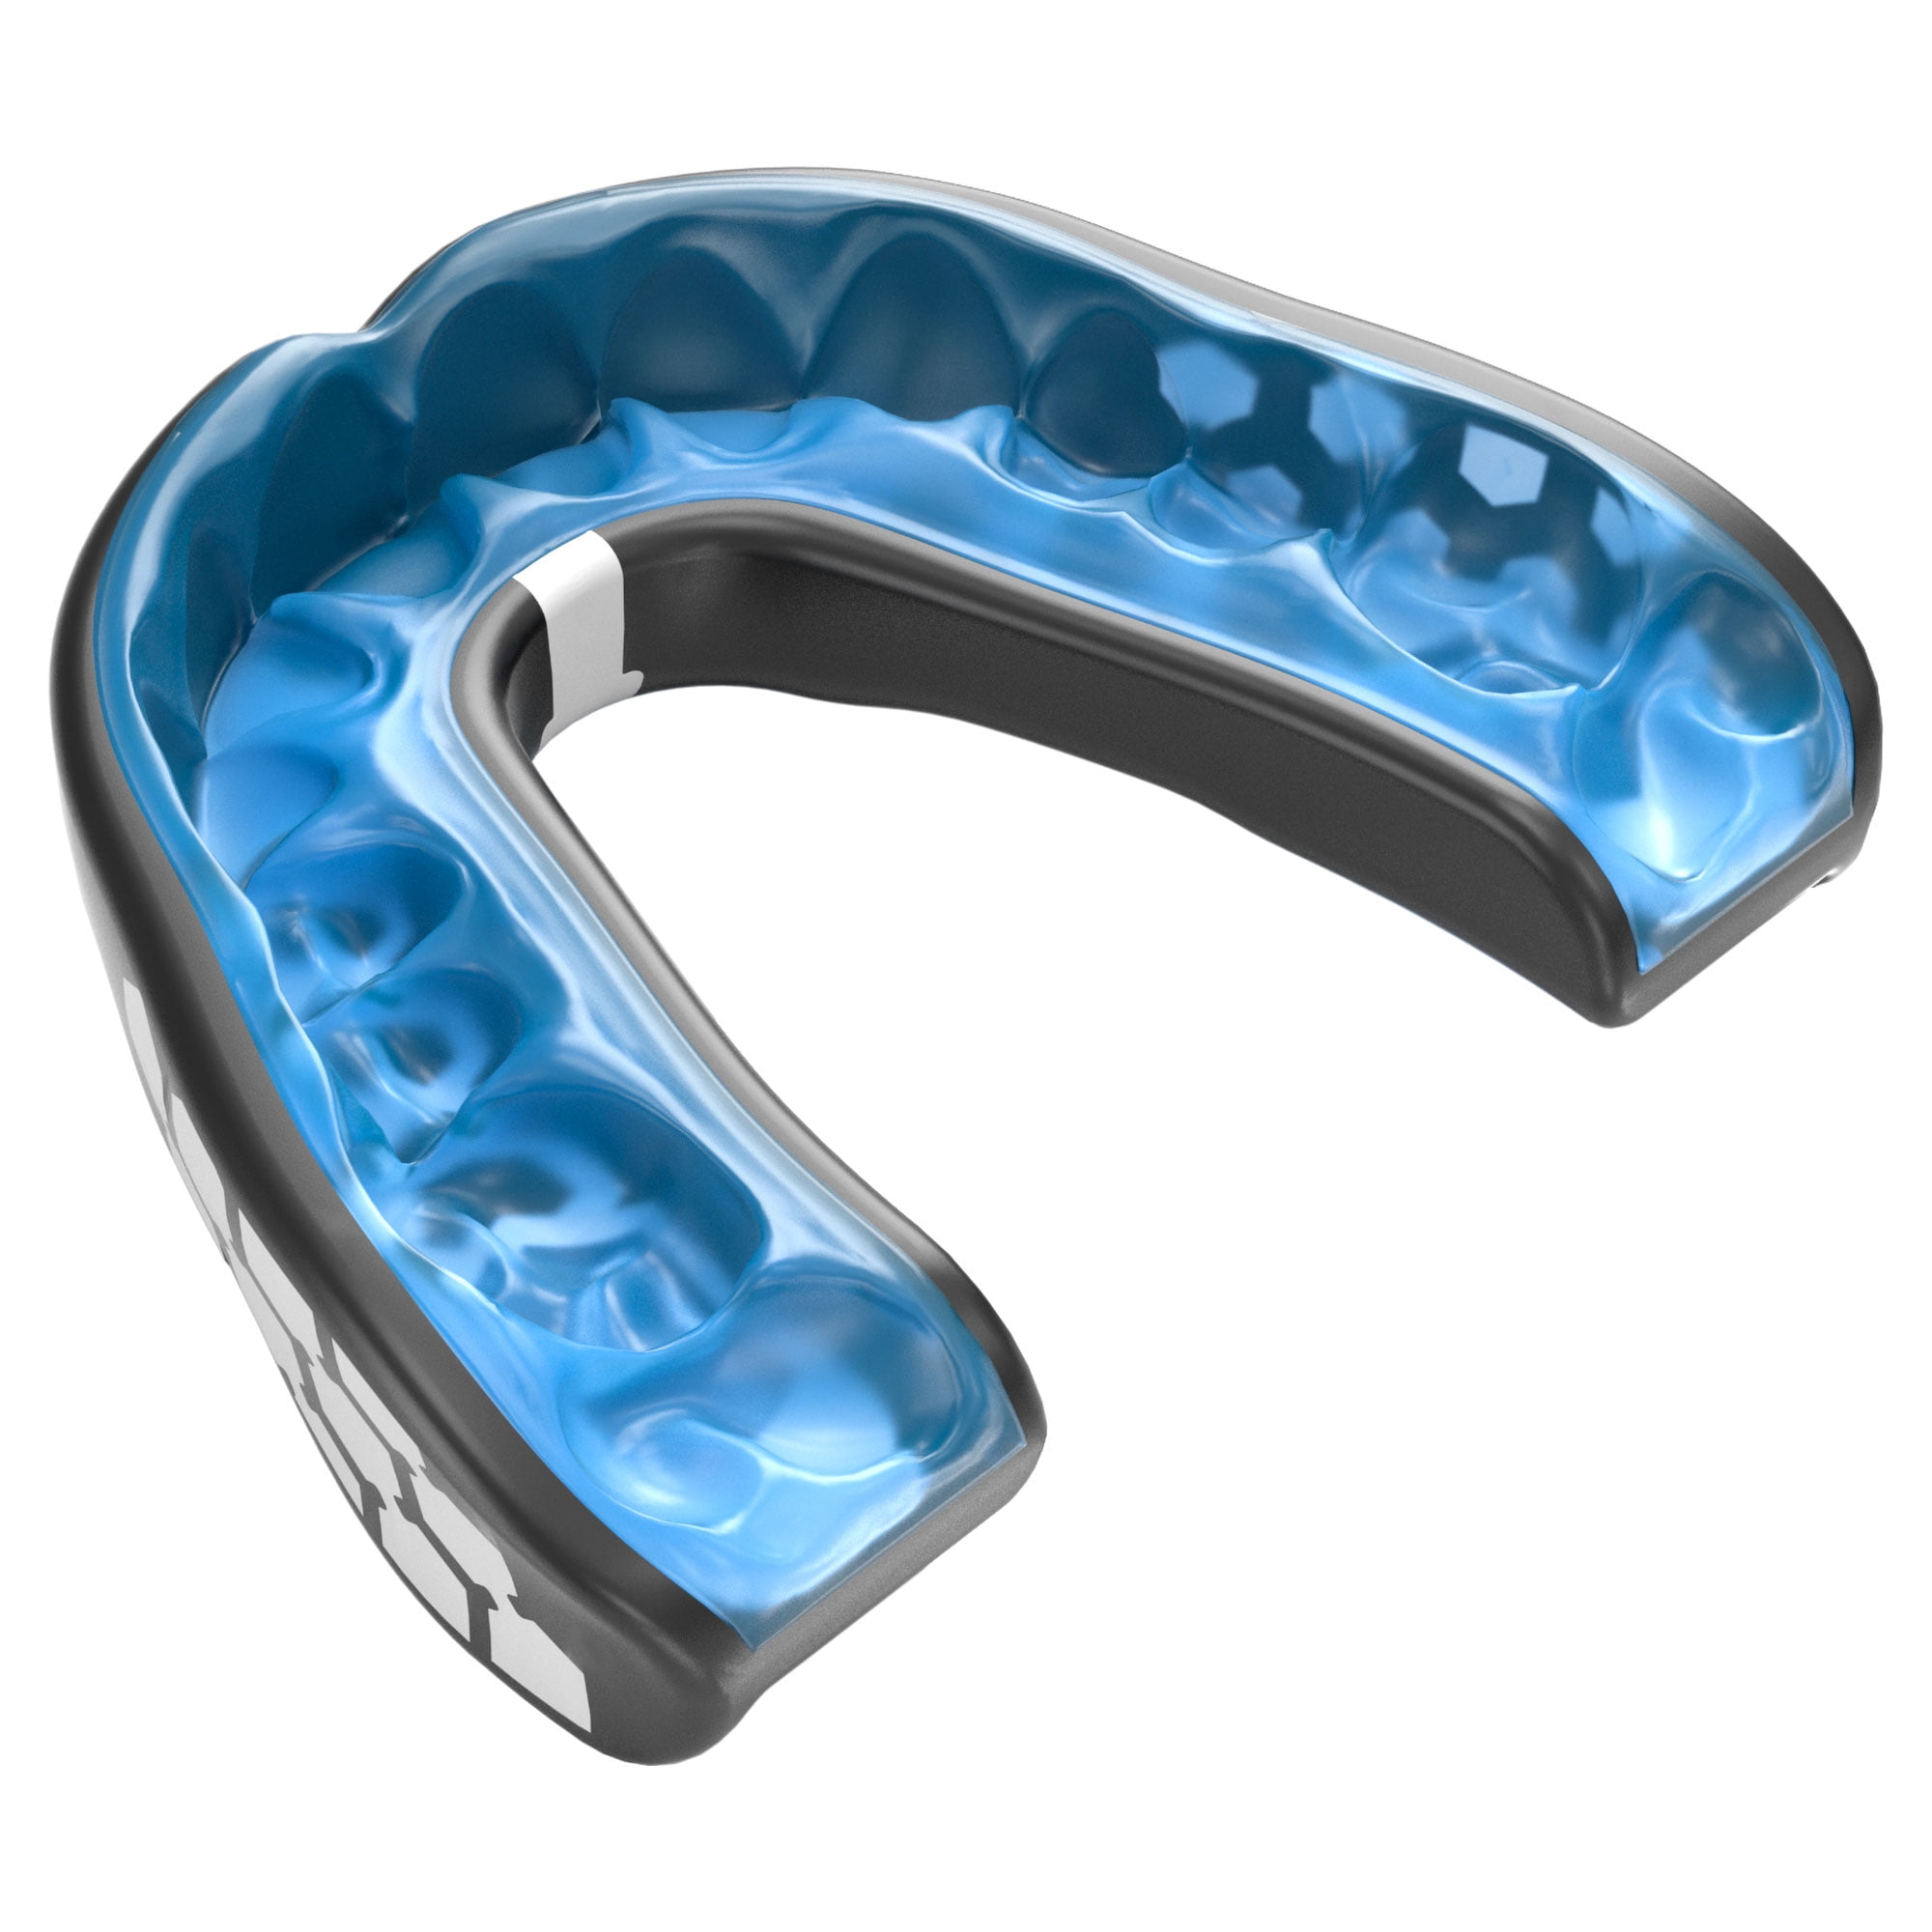 Shock Doctor Gel Max Flavor Fusion Flavored Mouthguard